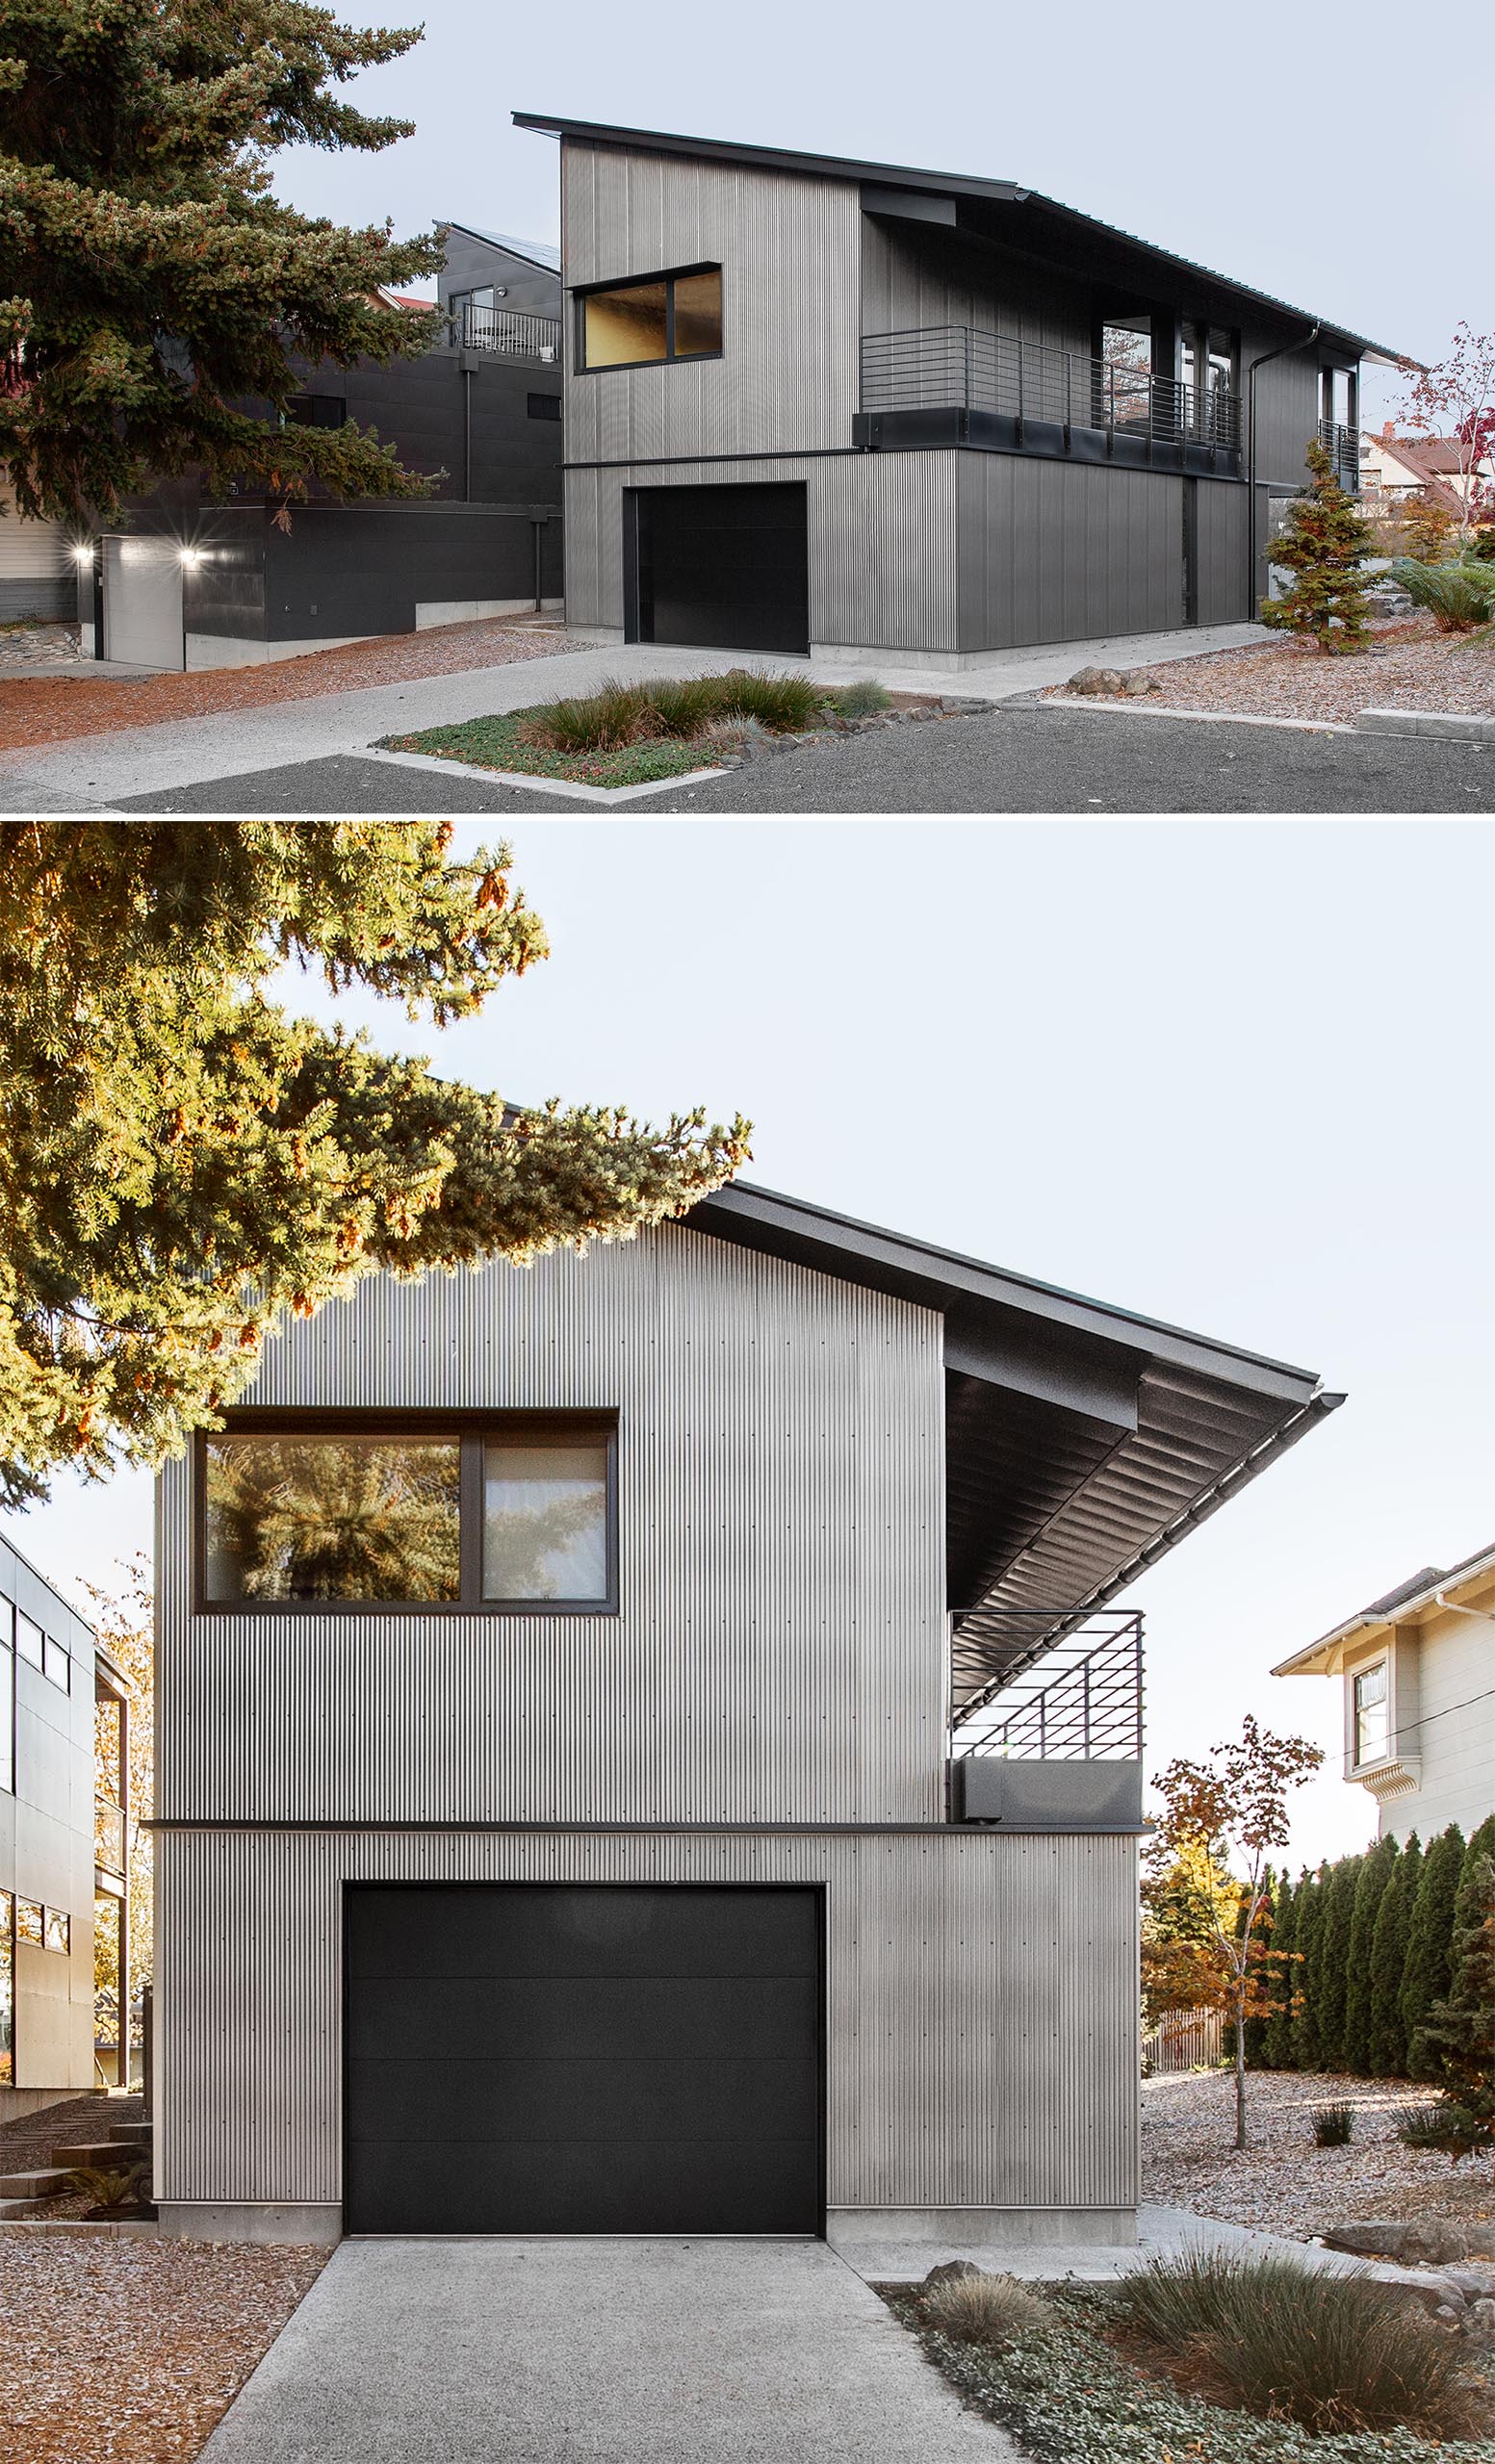 A modern house with an angular shed roof, corrugated metal siding, and black accents.